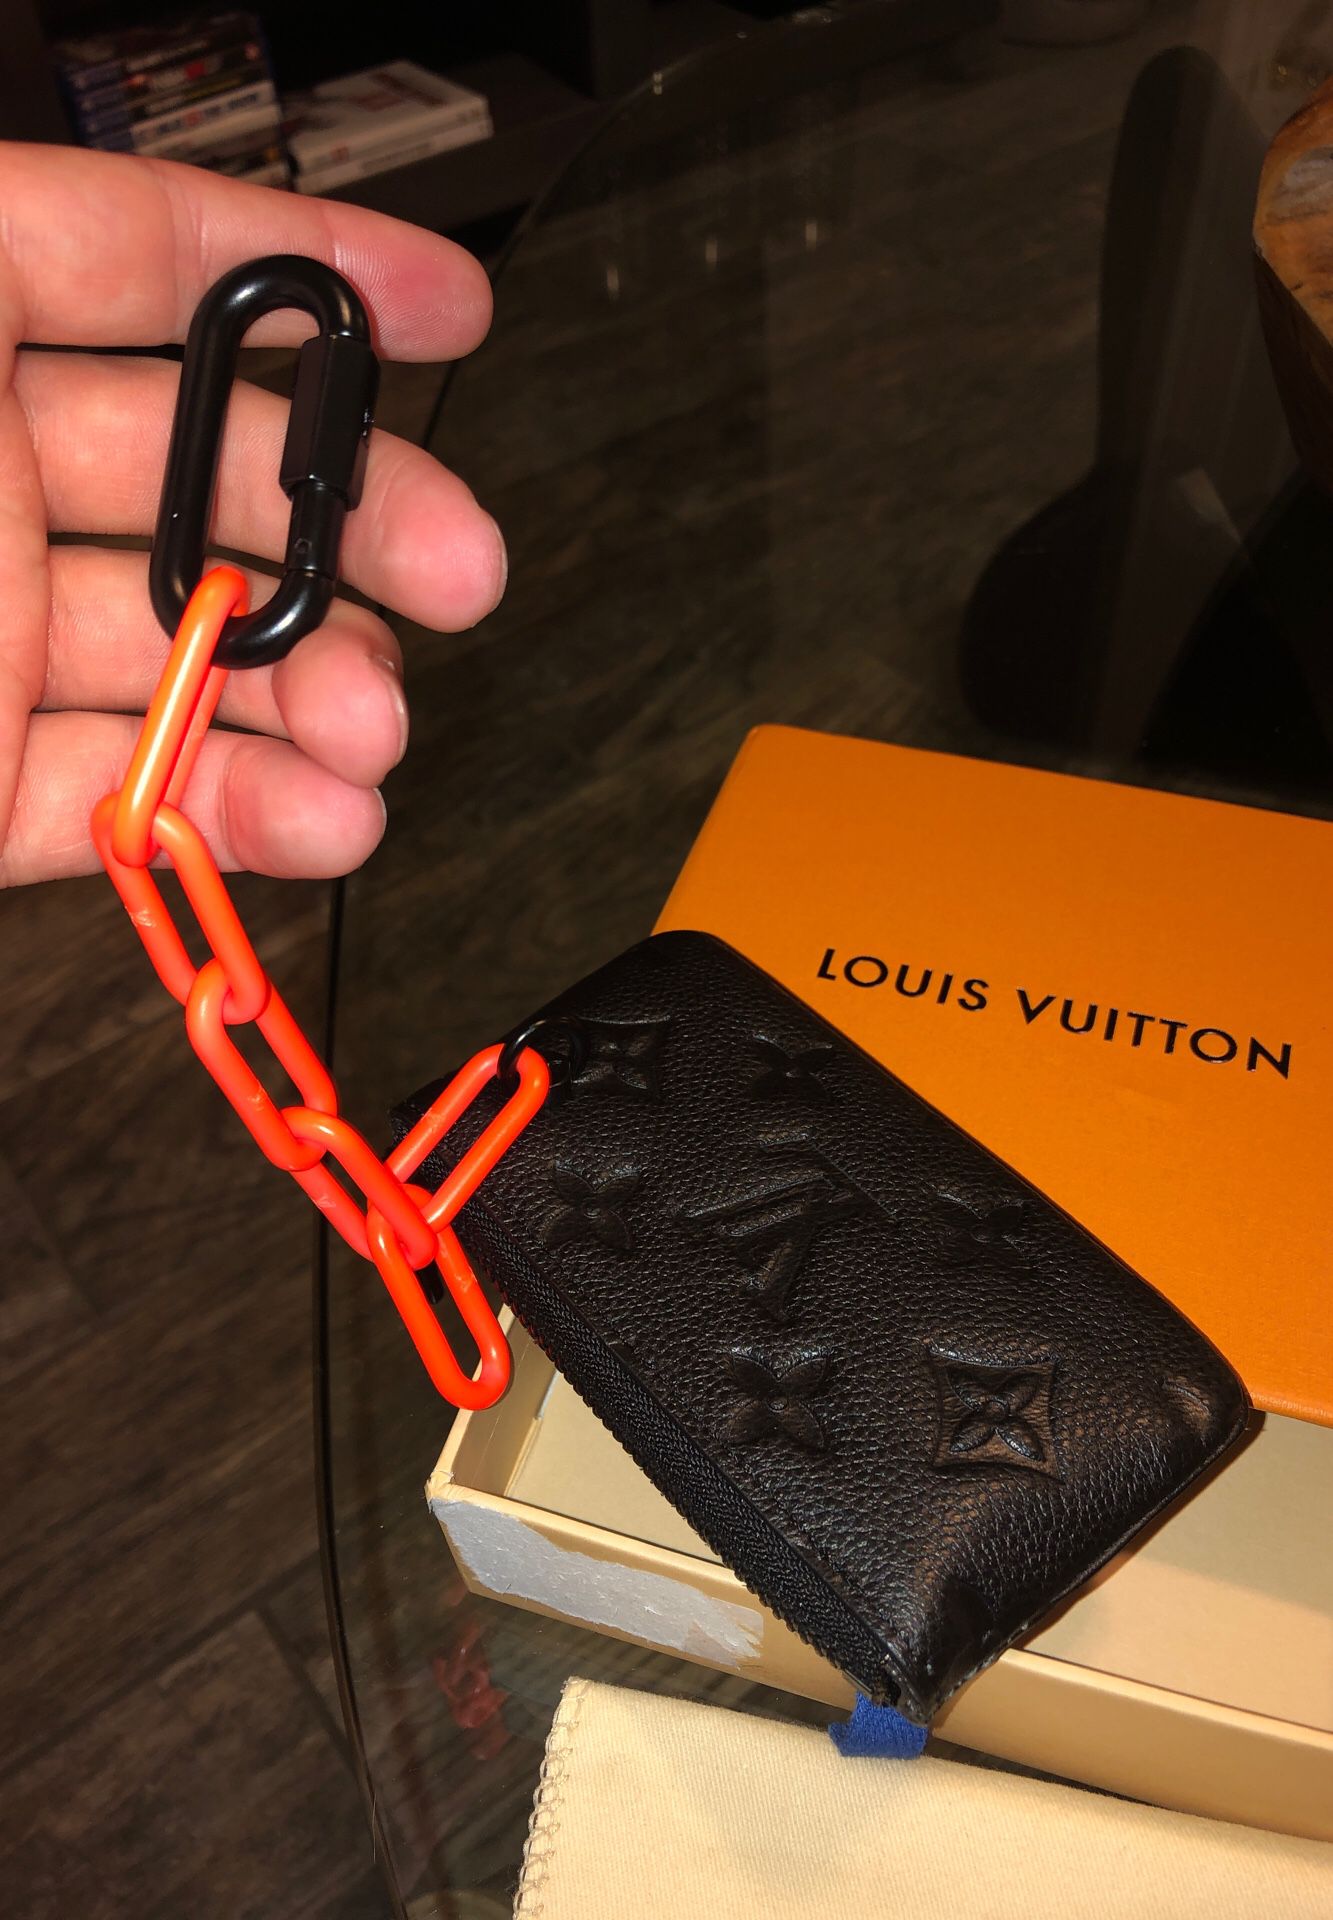 LV x Virgil Abloh coin purse for Sale in Lynnfield, MA - OfferUp